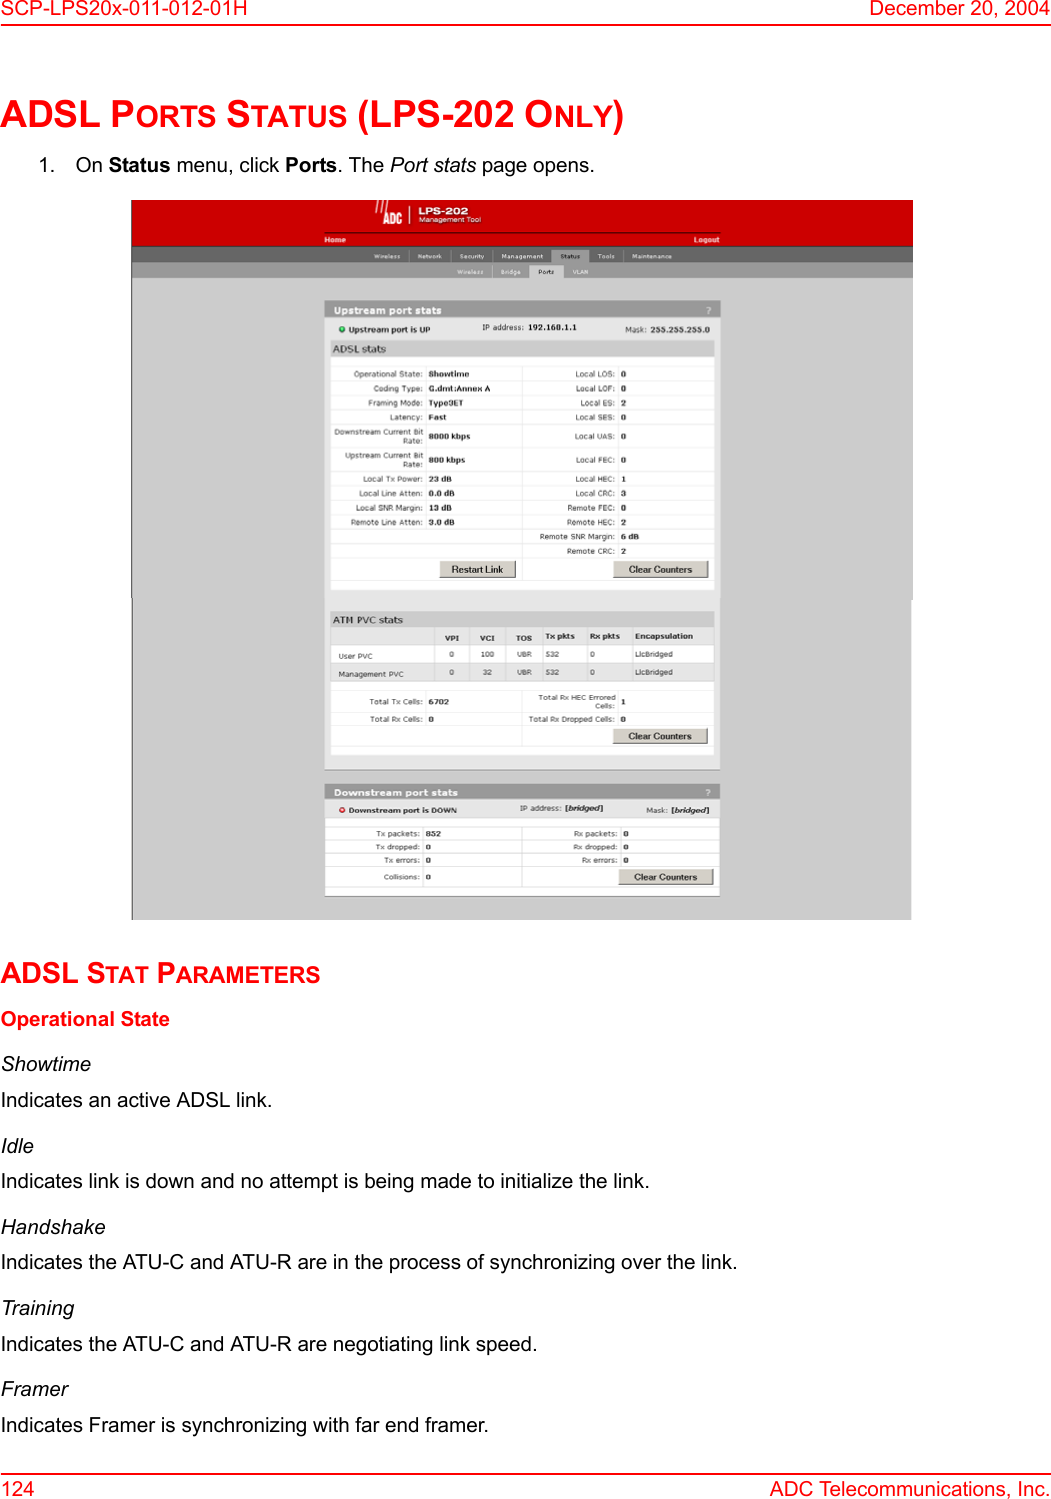 SCP-LPS20x-011-012-01H December 20, 2004124 ADC Telecommunications, Inc.ADSL PORTS STATUS (LPS-202 ONLY)1. On Status menu, click Ports. The Port stats page opens.ADSL STAT PARAMETERSOperational StateShowtimeIndicates an active ADSL link.IdleIndicates link is down and no attempt is being made to initialize the link.HandshakeIndicates the ATU-C and ATU-R are in the process of synchronizing over the link.TrainingIndicates the ATU-C and ATU-R are negotiating link speed.FramerIndicates Framer is synchronizing with far end framer.